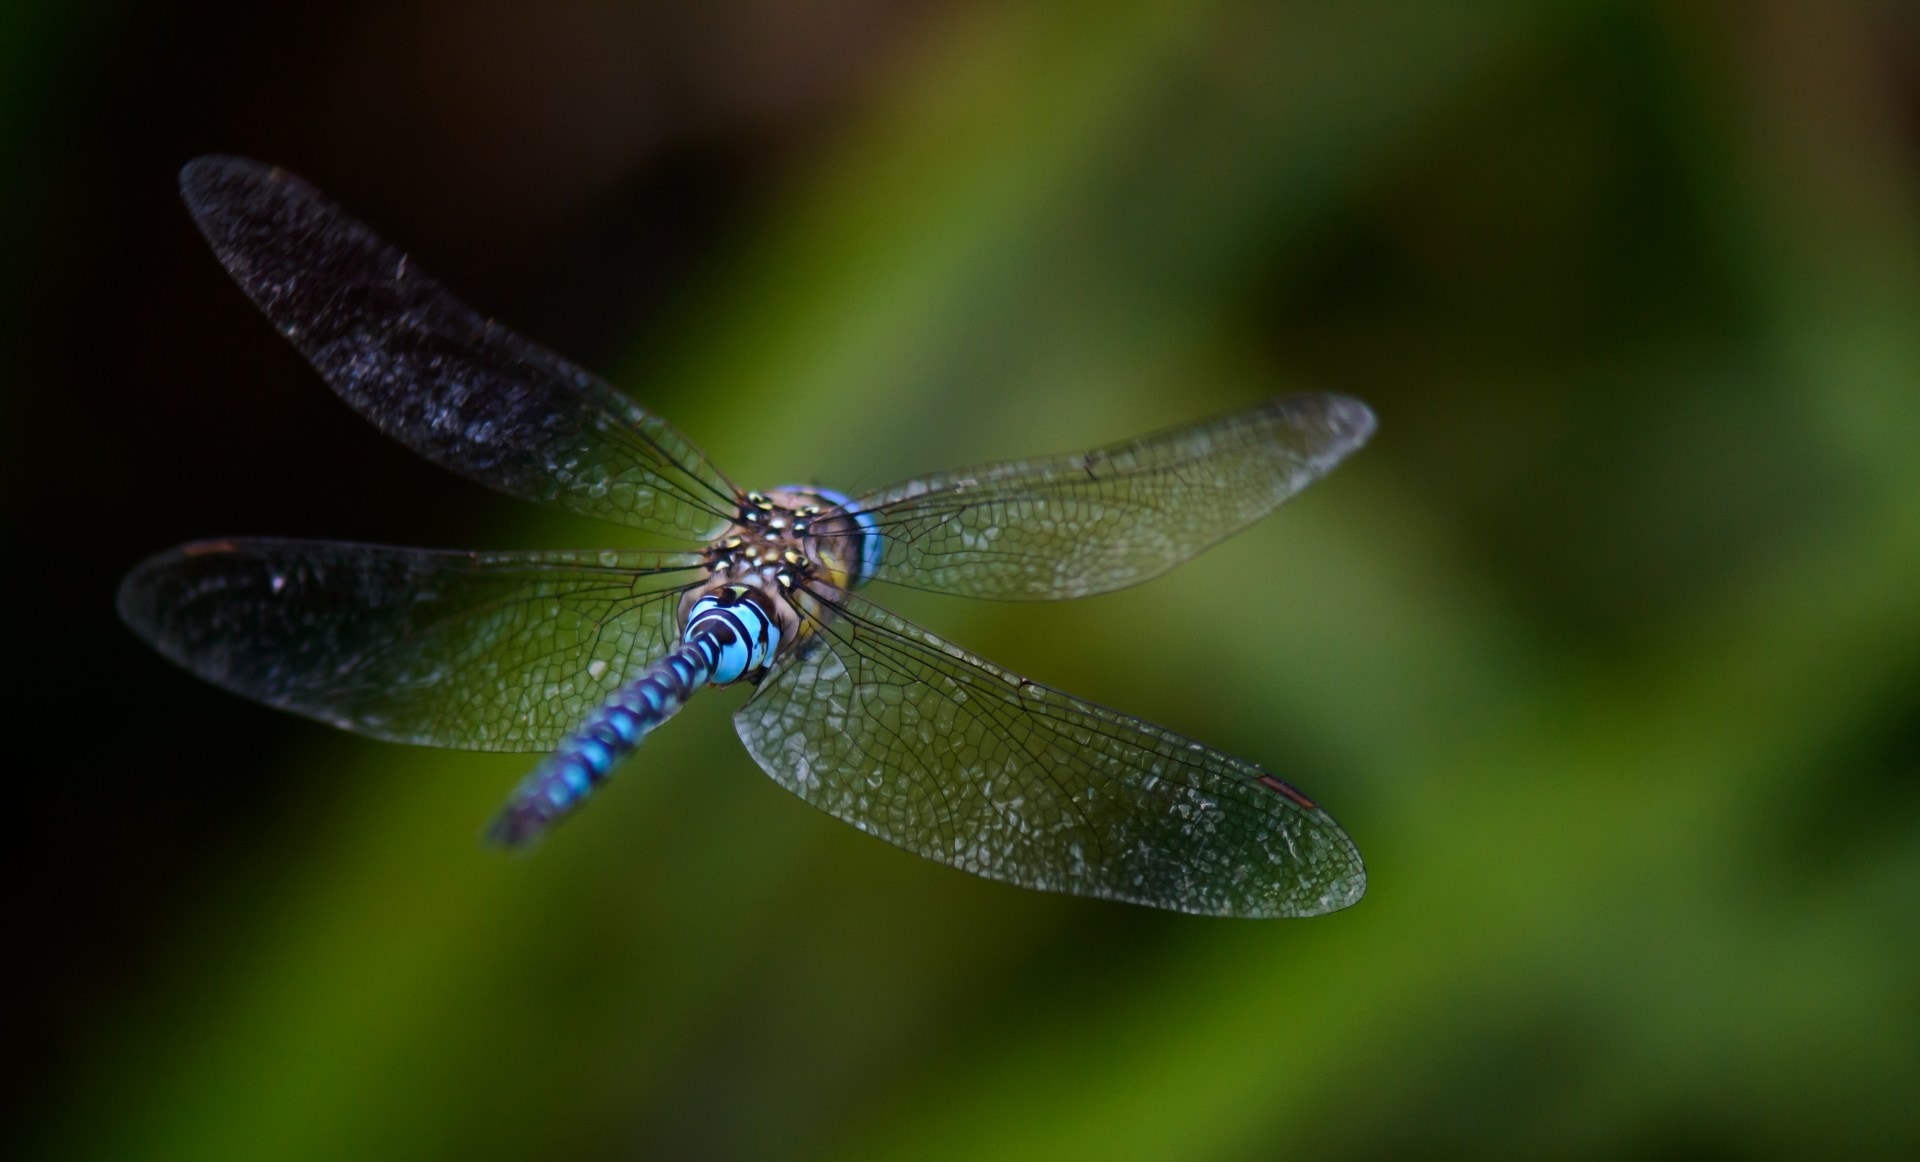 Dragonfly, Fly, Background, Blurred, insect, animal themes